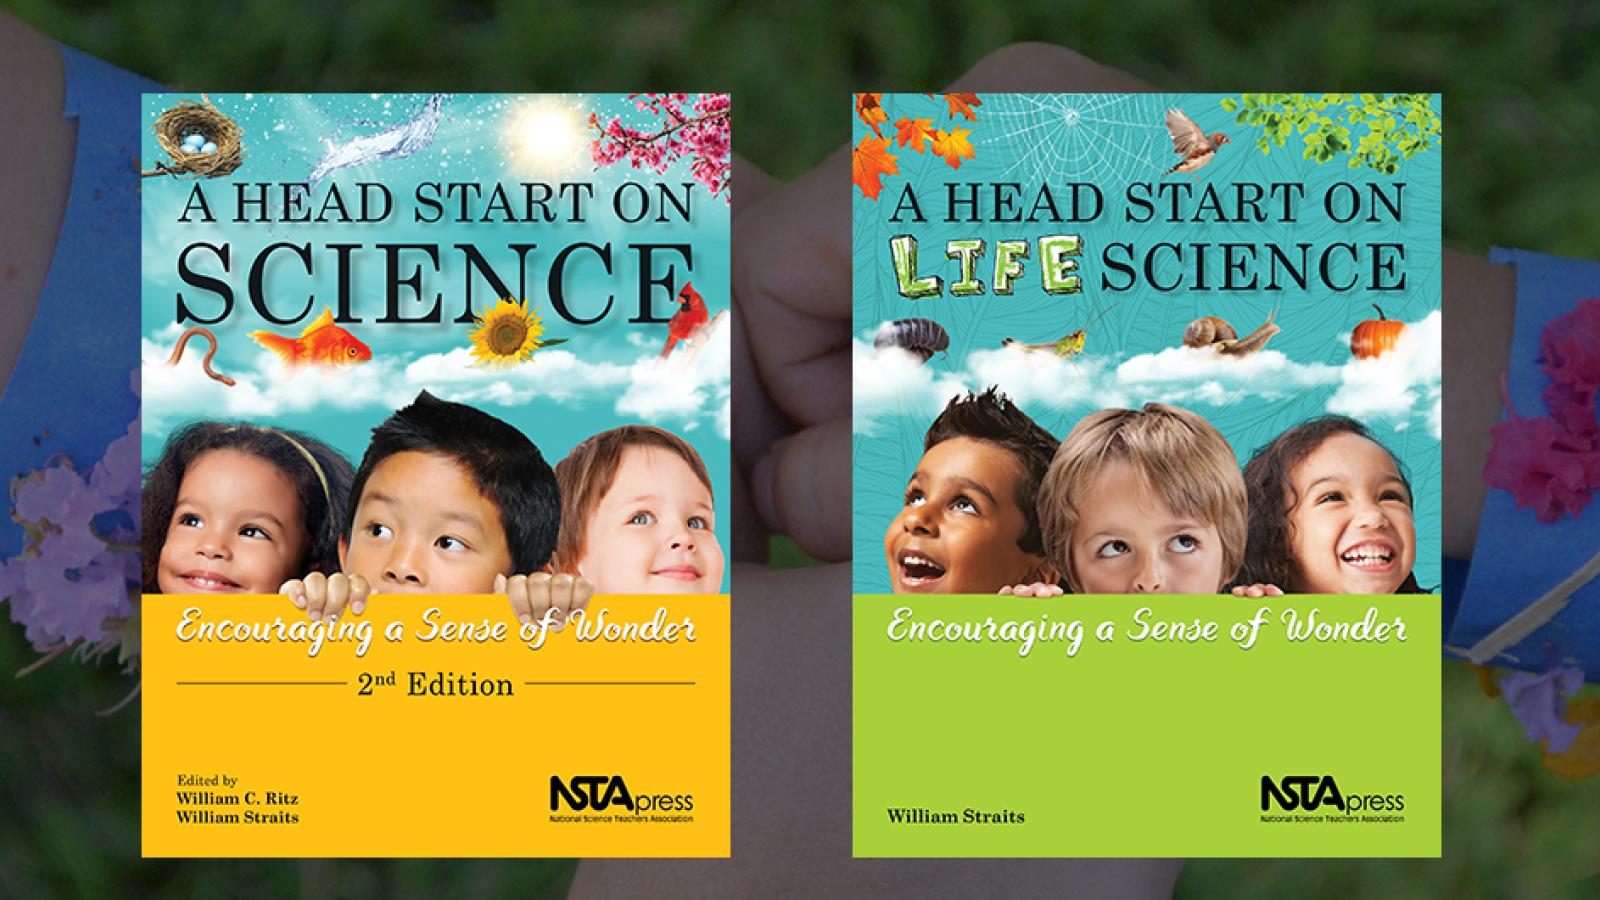 A Head Start on Science and A Head Start on Life Science books